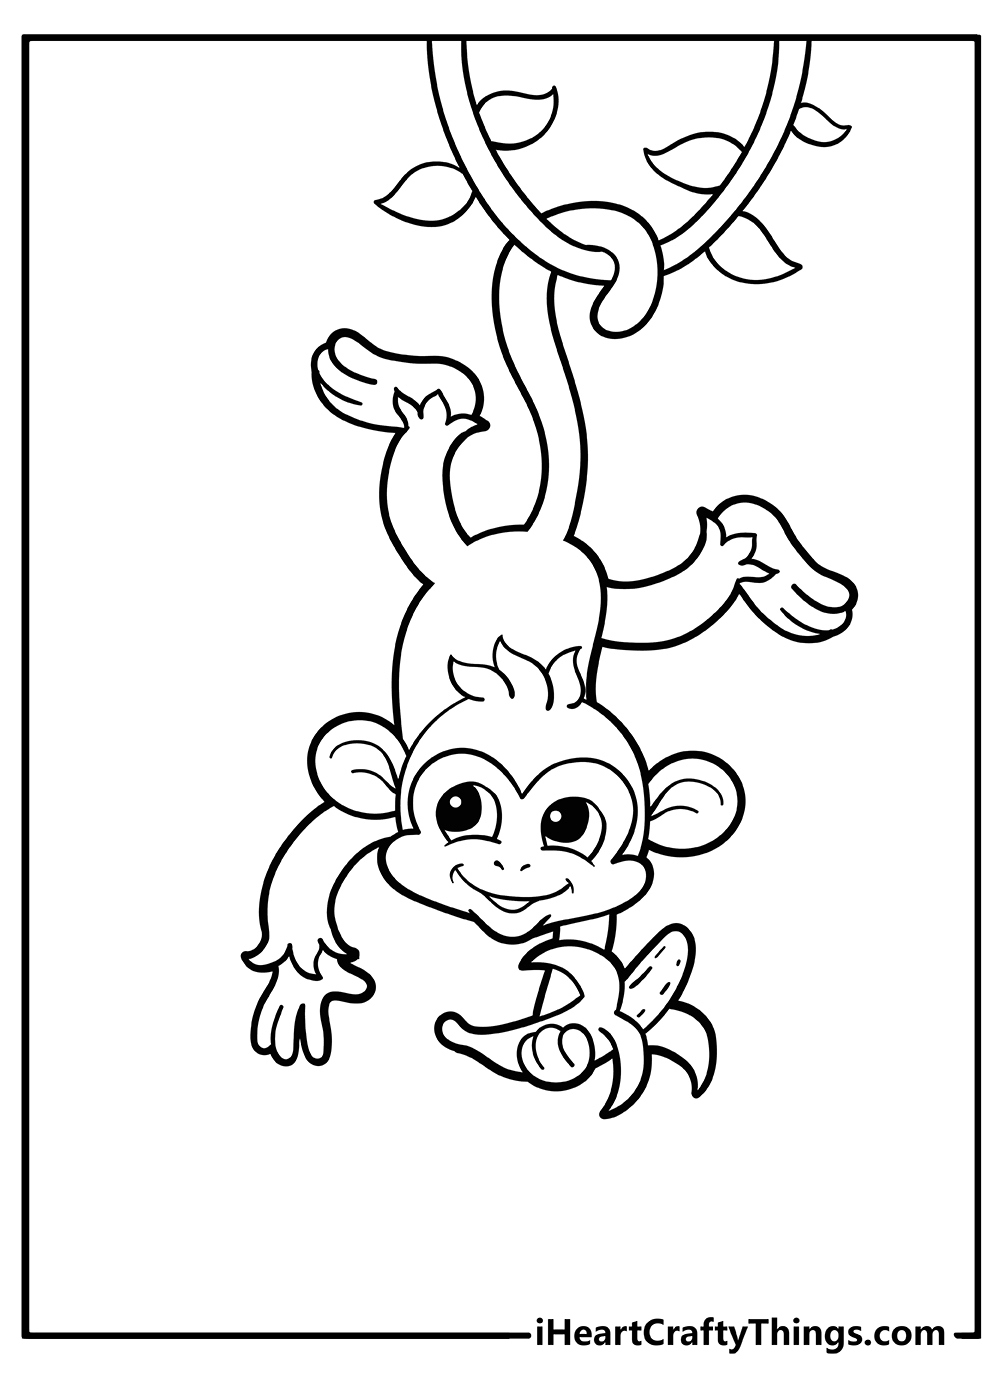 Monkey coloring pages free printables